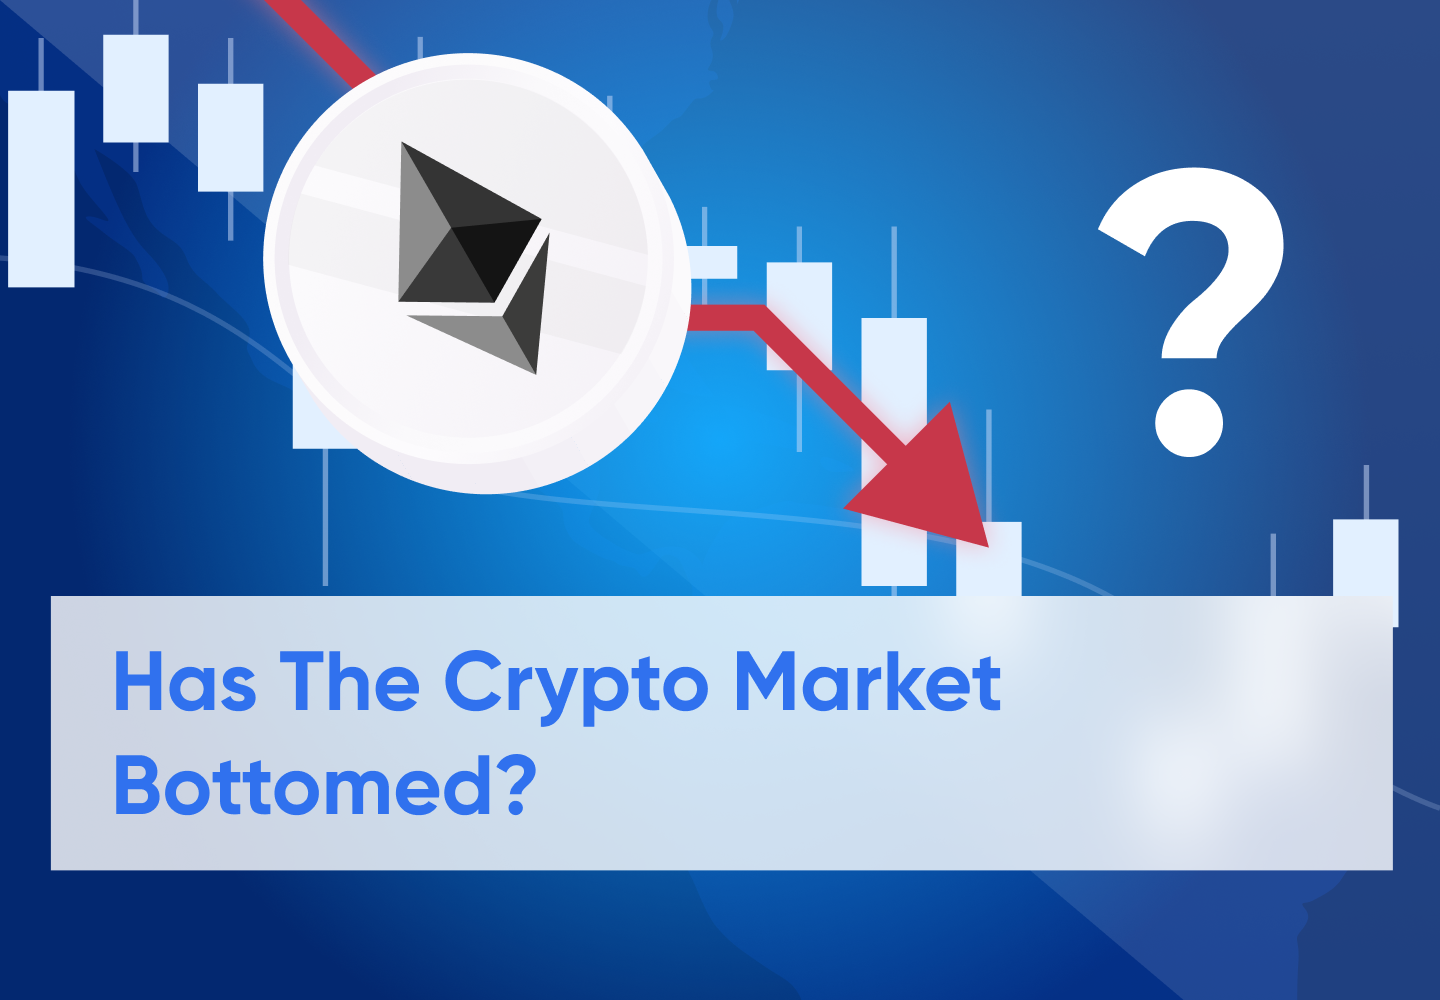 Ethereum Surge Could Ignite Crypto Market Rally